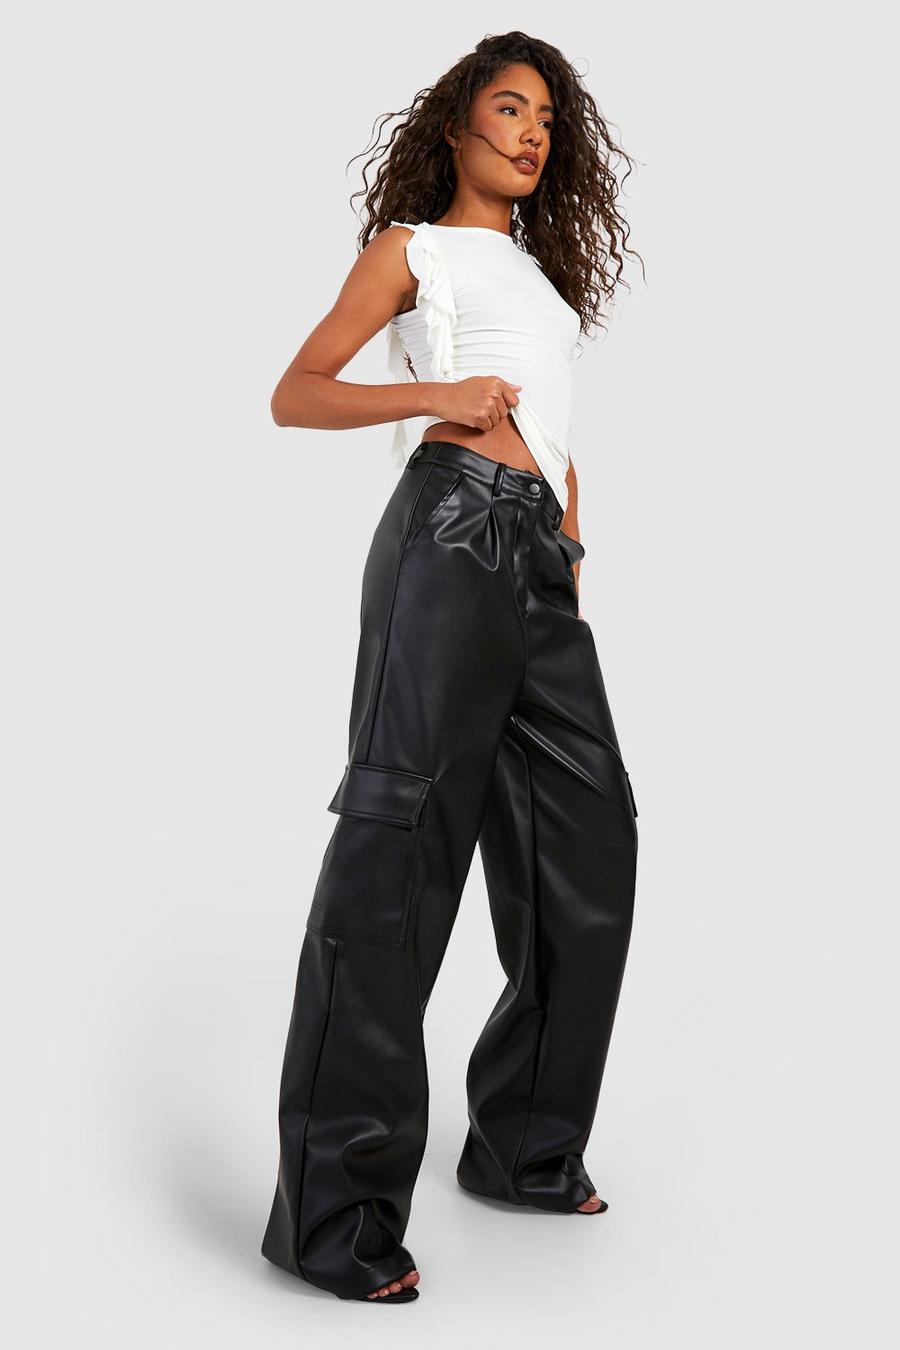 Black Tall Leather Look High Waisted Cargo Pants